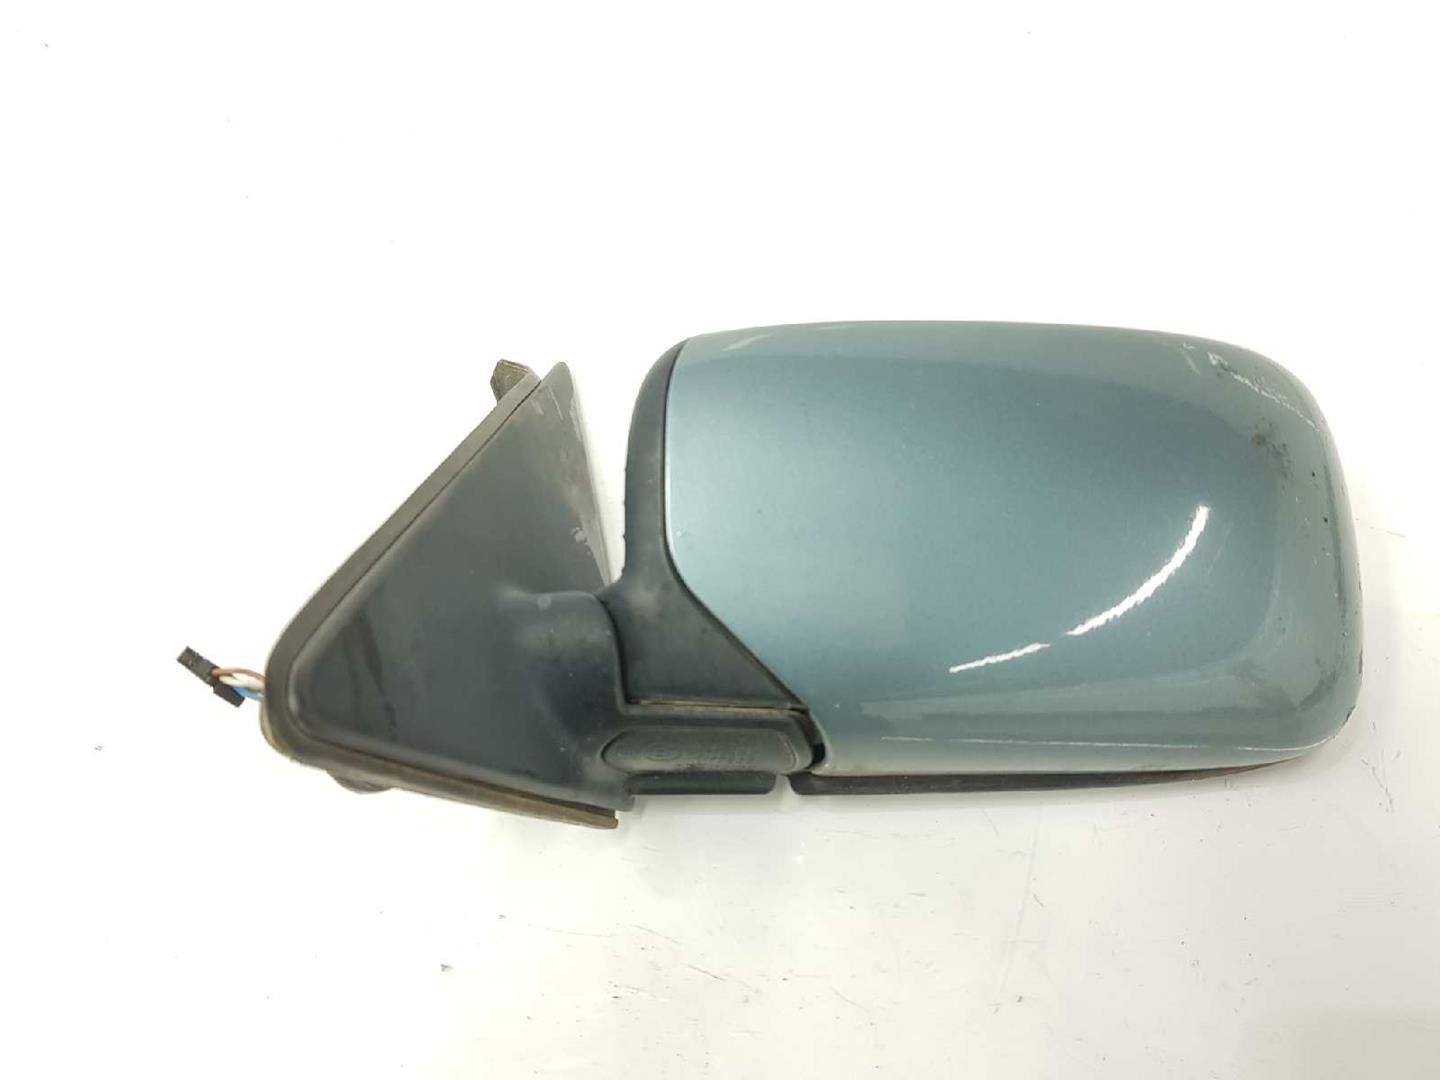 BMW 3 Series E36 (1990-2000) Left Side Wing Mirror 51168144407, 4PINES 19653655